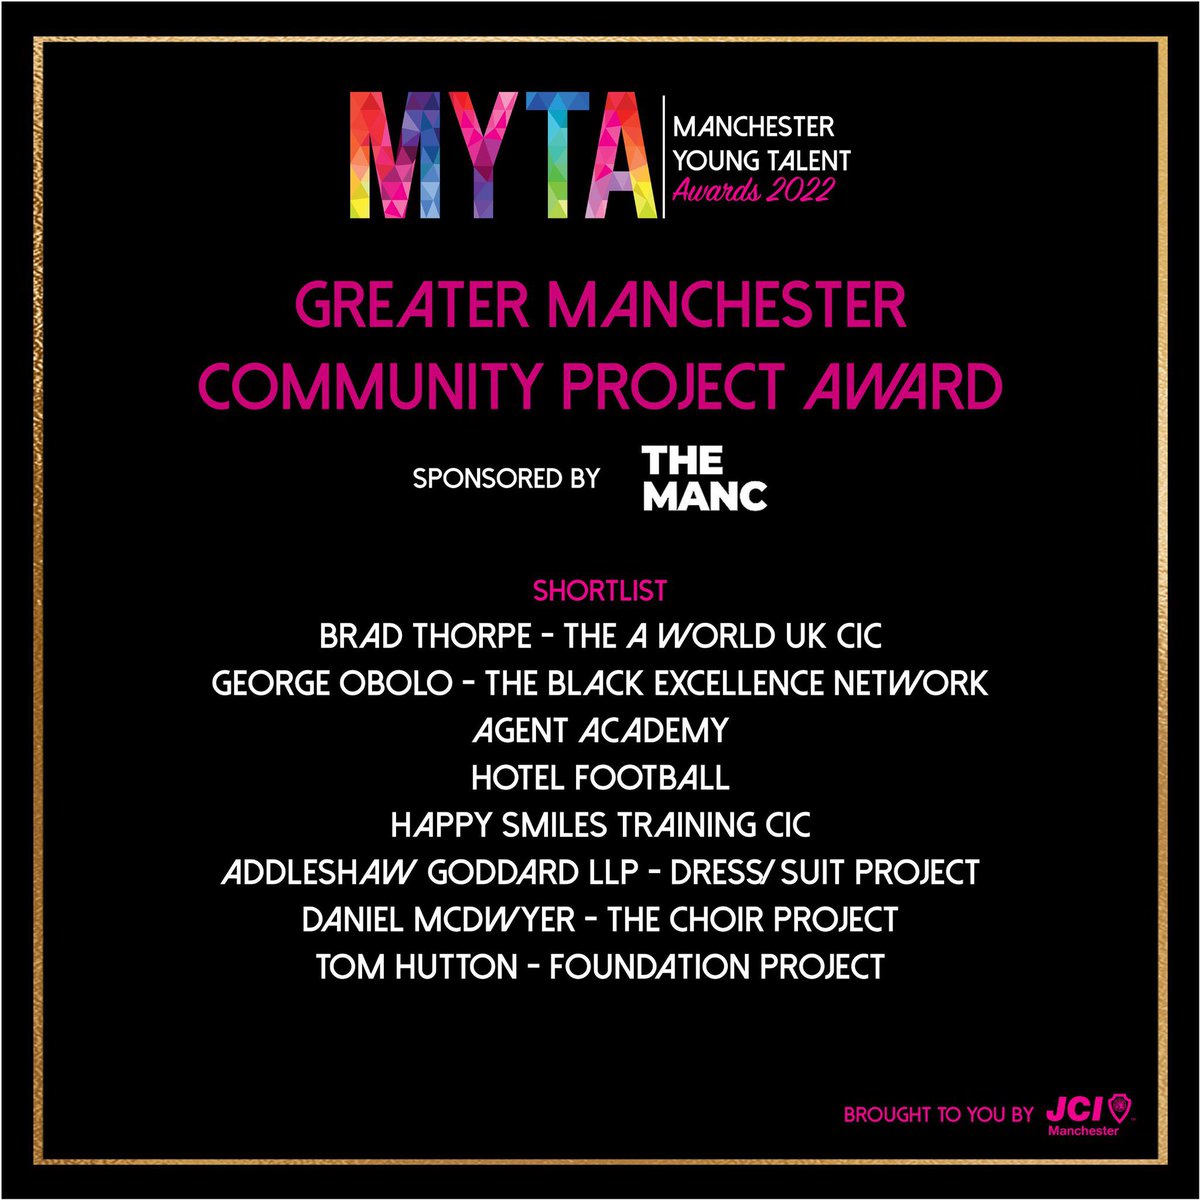 Could today even start with better news than this? 🤩 We’ve been shortlisted for the Greater Manchester Community Project award in this year’s #MYTA22 🥳 We are incredibly grateful to be considered for this title. Best of luck to all the other nominees as well!🤞🏻